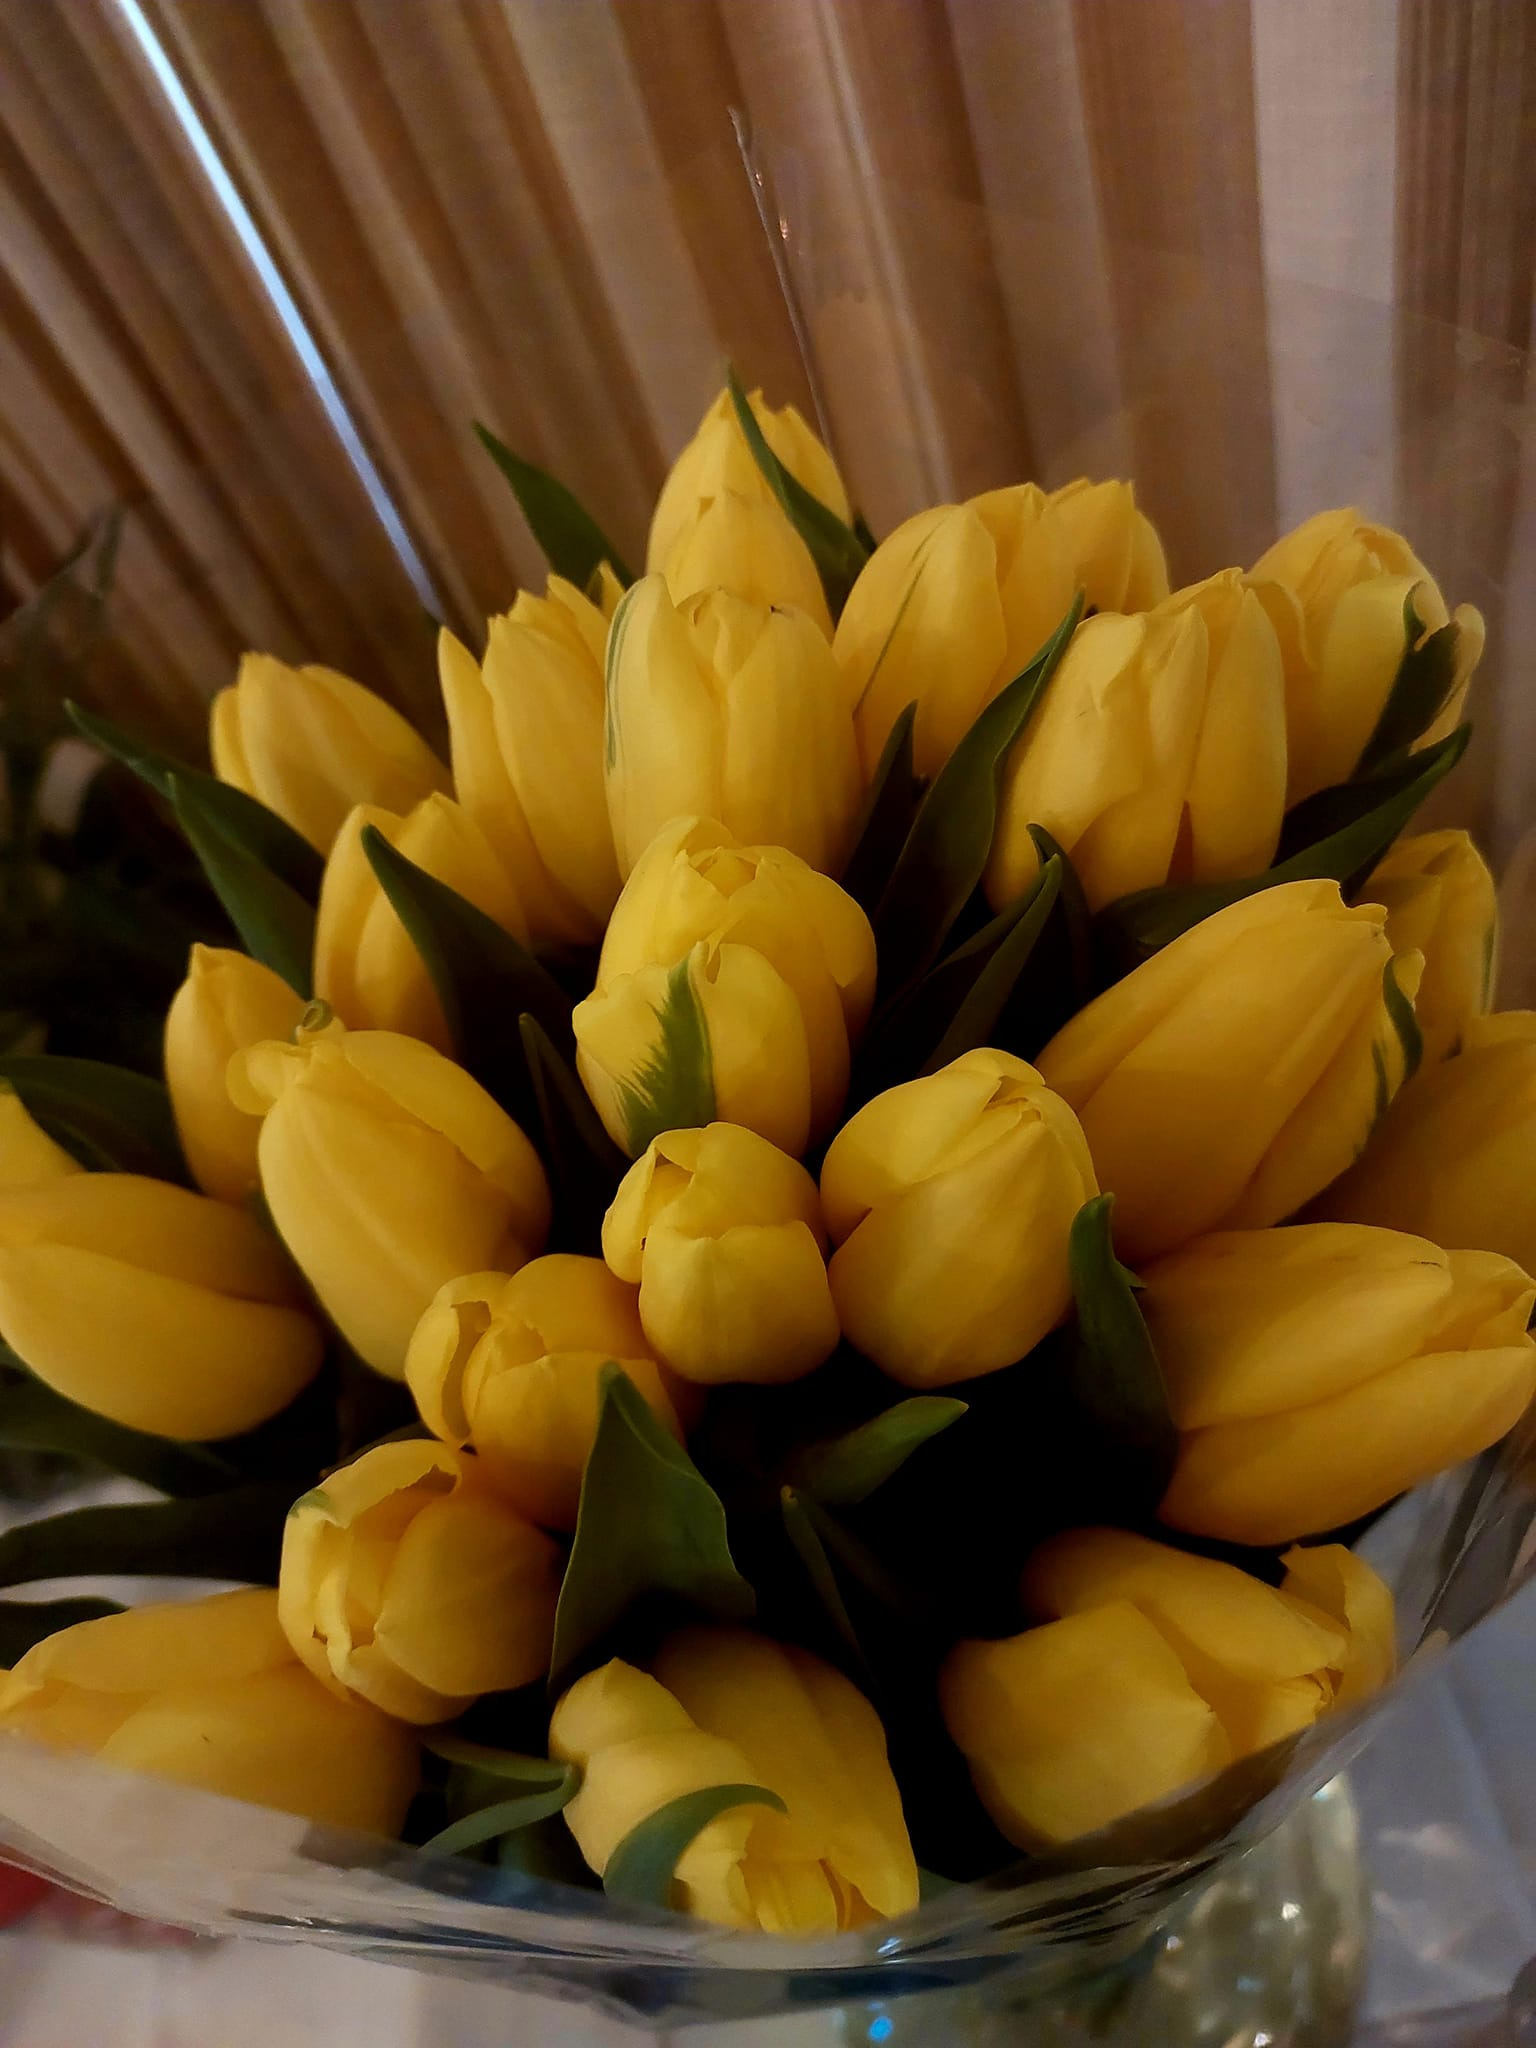 A bouquet of tulips for the Author of the photos.